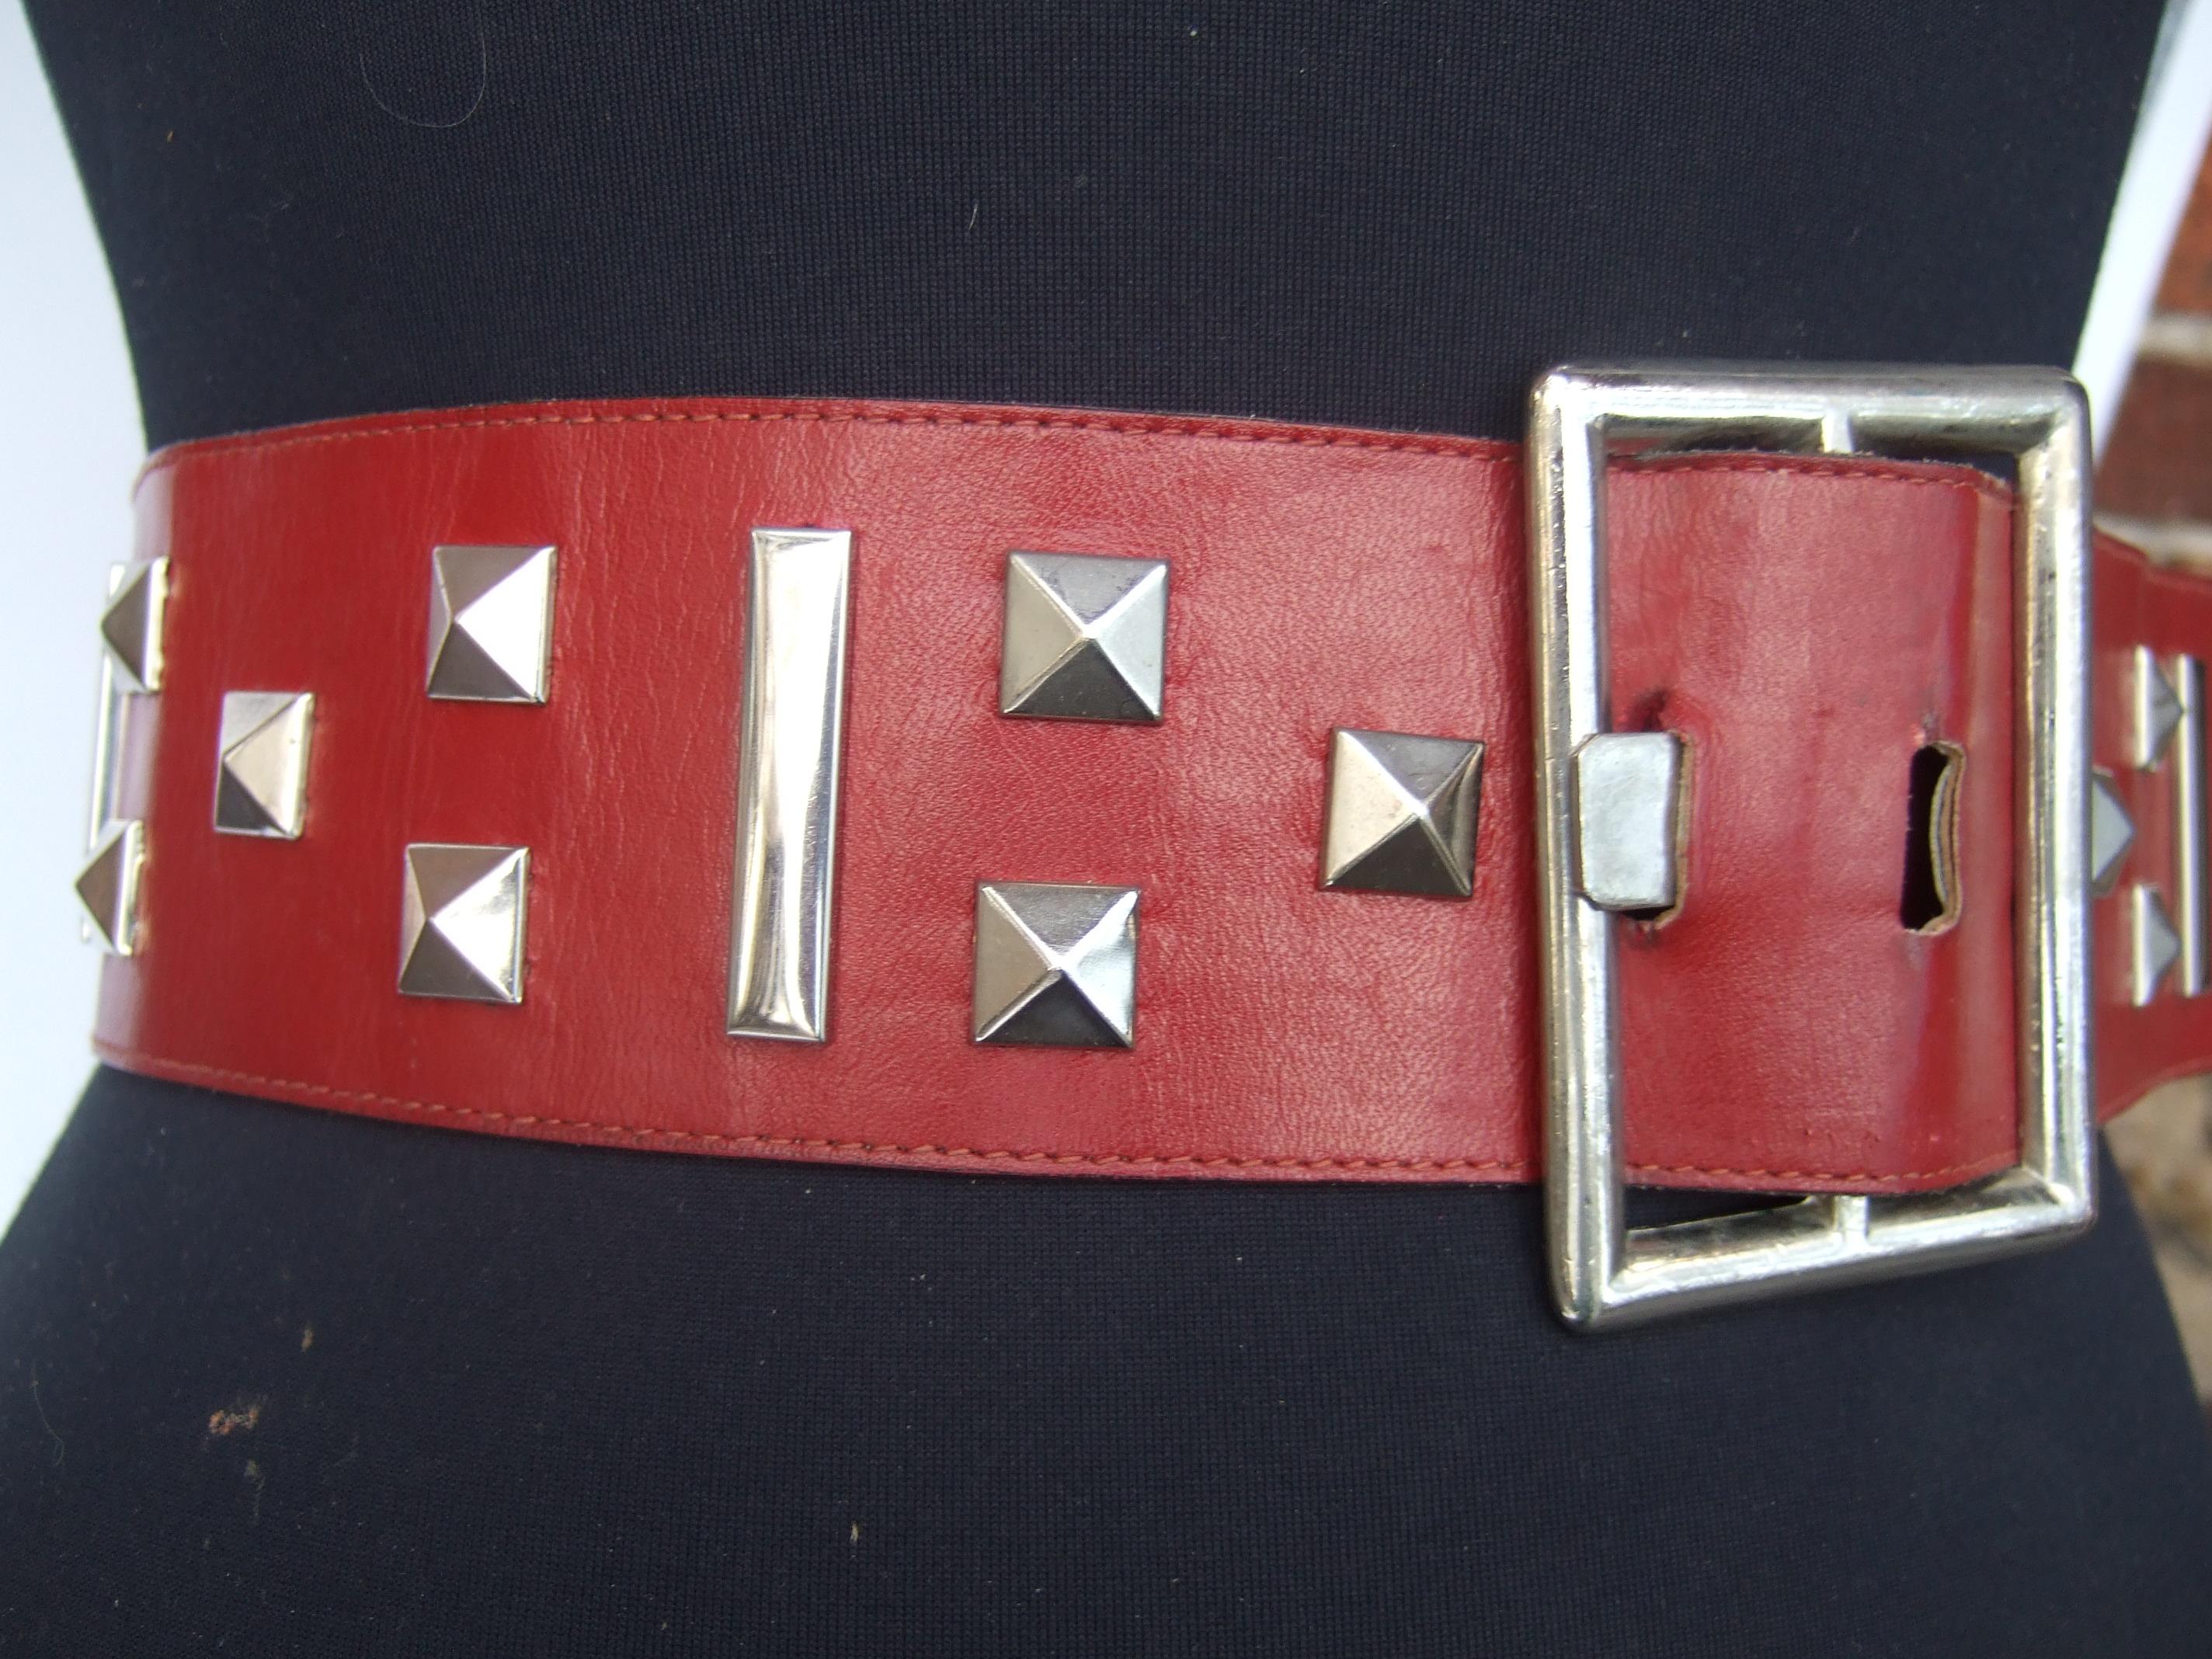 Yves Saint Laurent Wide Red Leather Chrome Grommet Studded Belt c 1970s In Good Condition For Sale In University City, MO